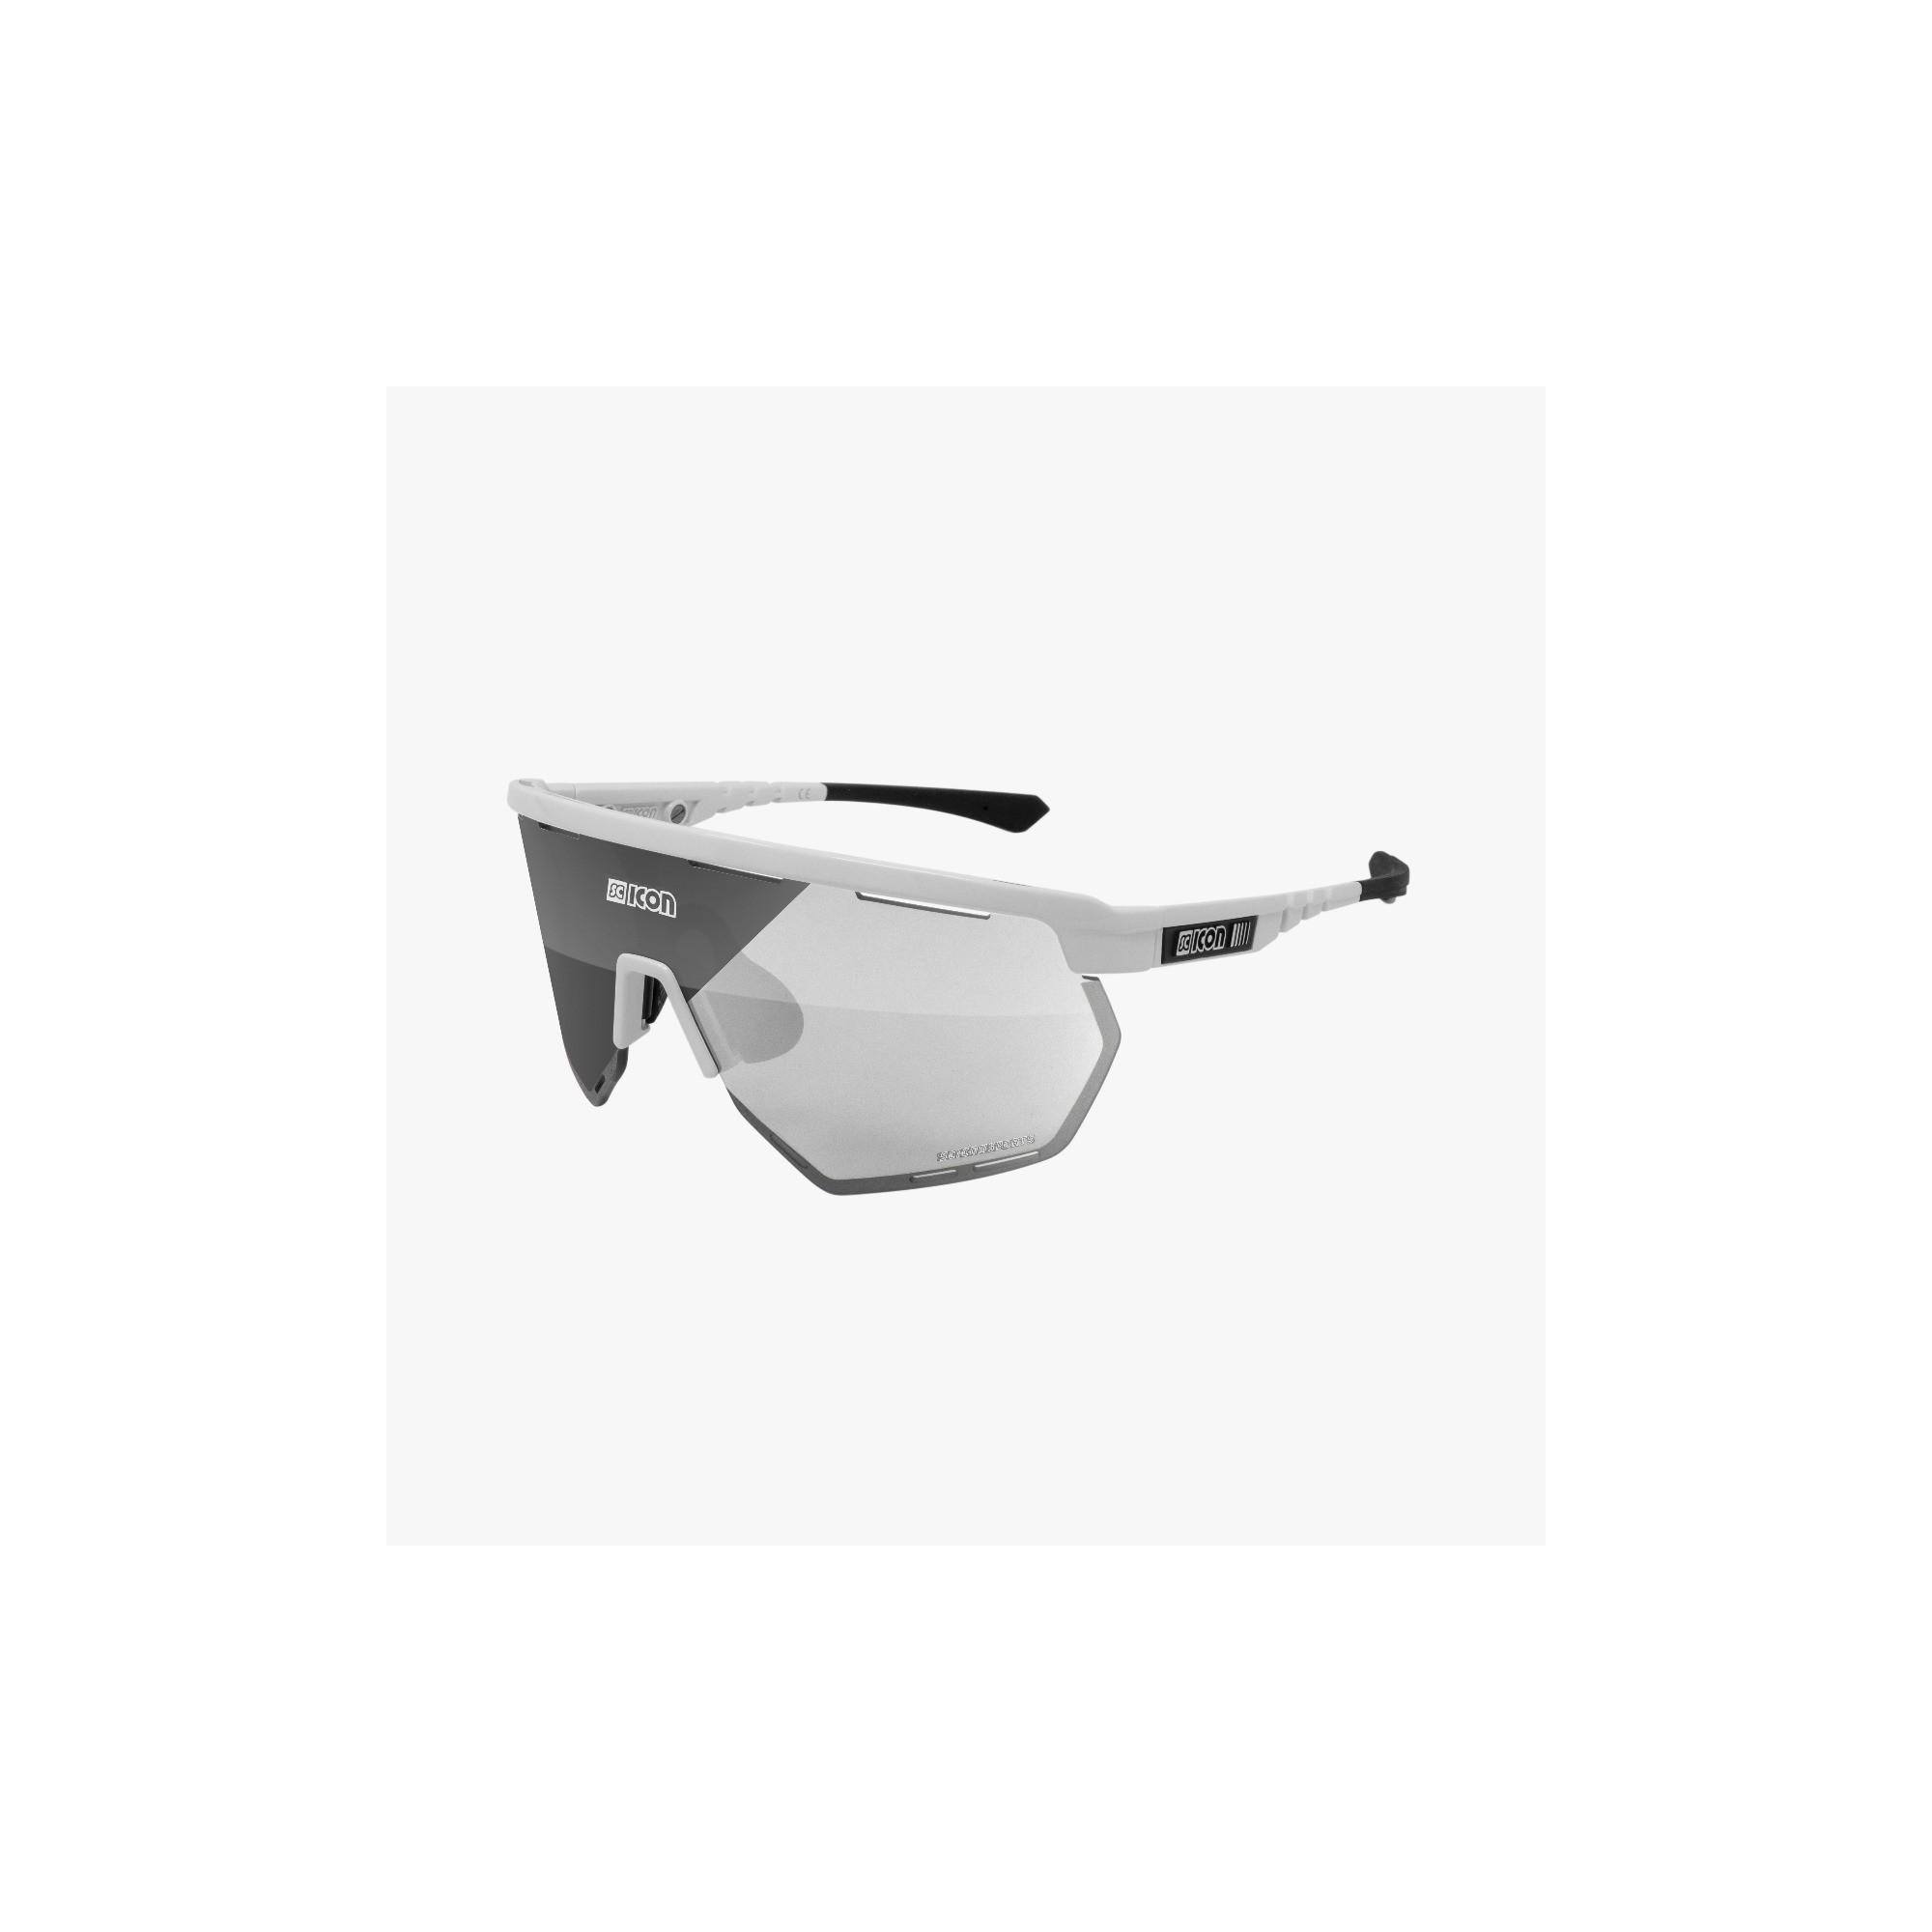 LUNETTES SCI-CON AEROWING WHITE PHOTOCROMIC